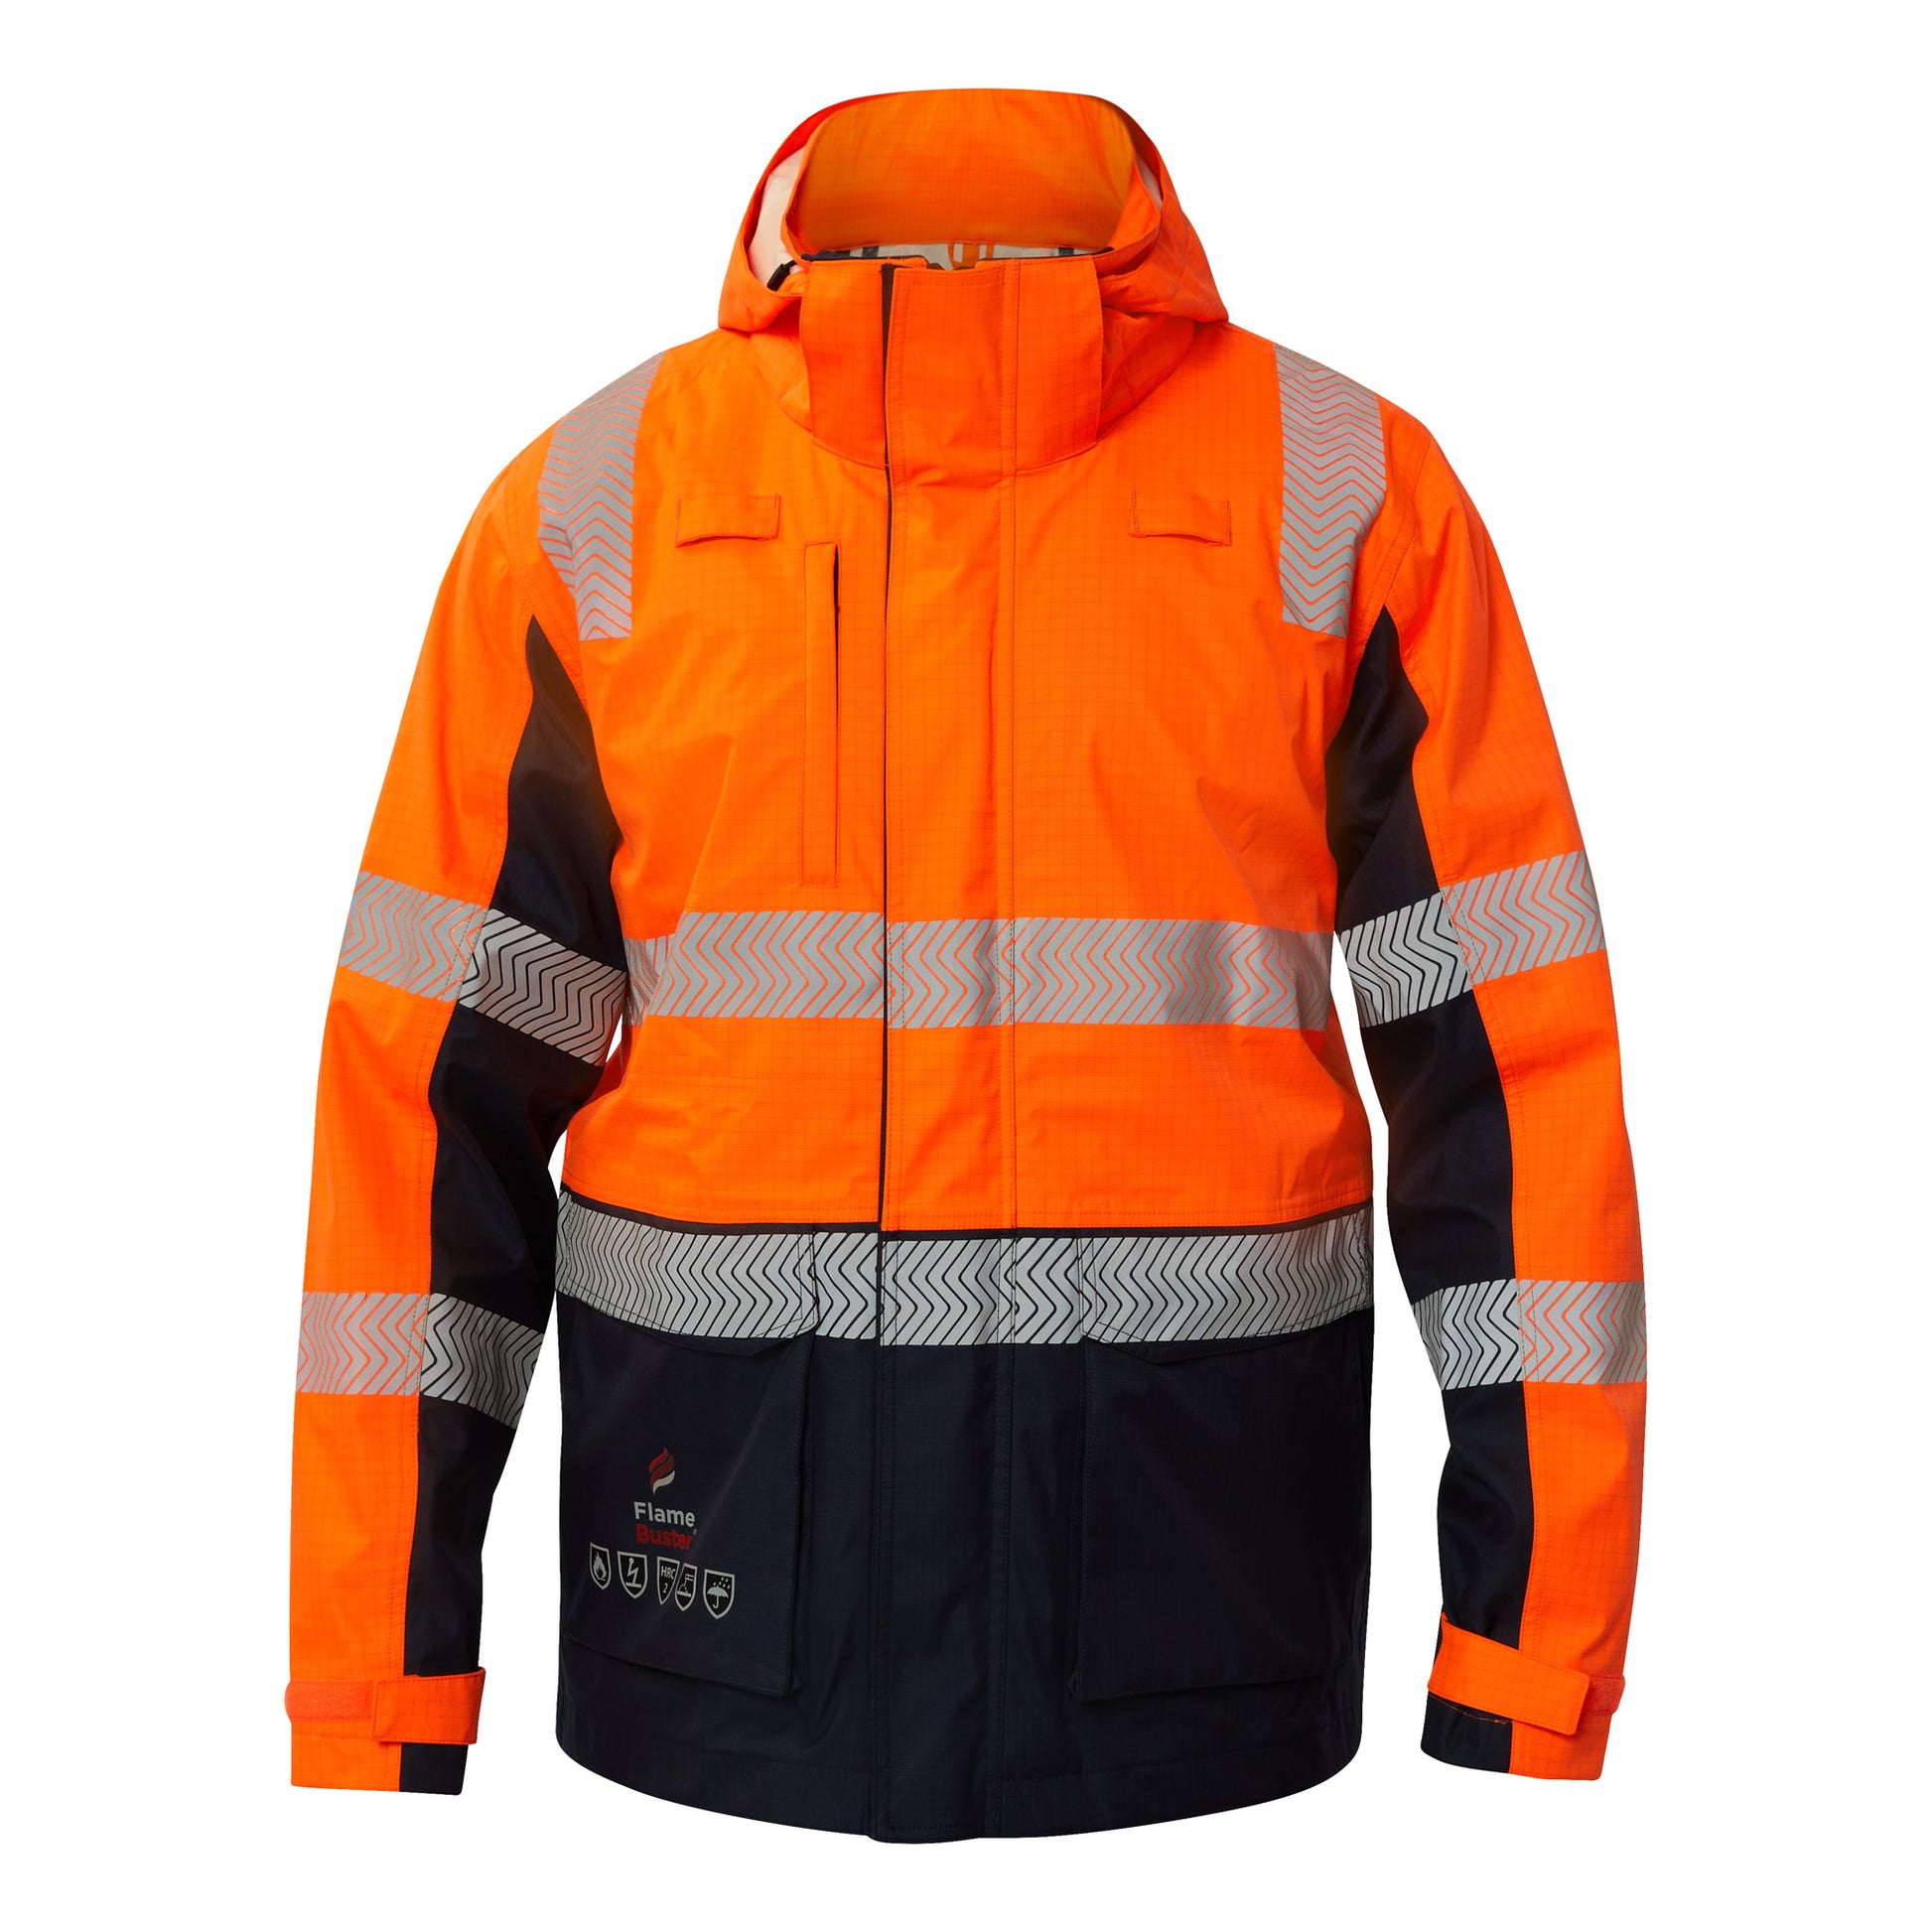 TORRENT HRC2 Reflective Wet Weather Jacket - made by FlameBuster